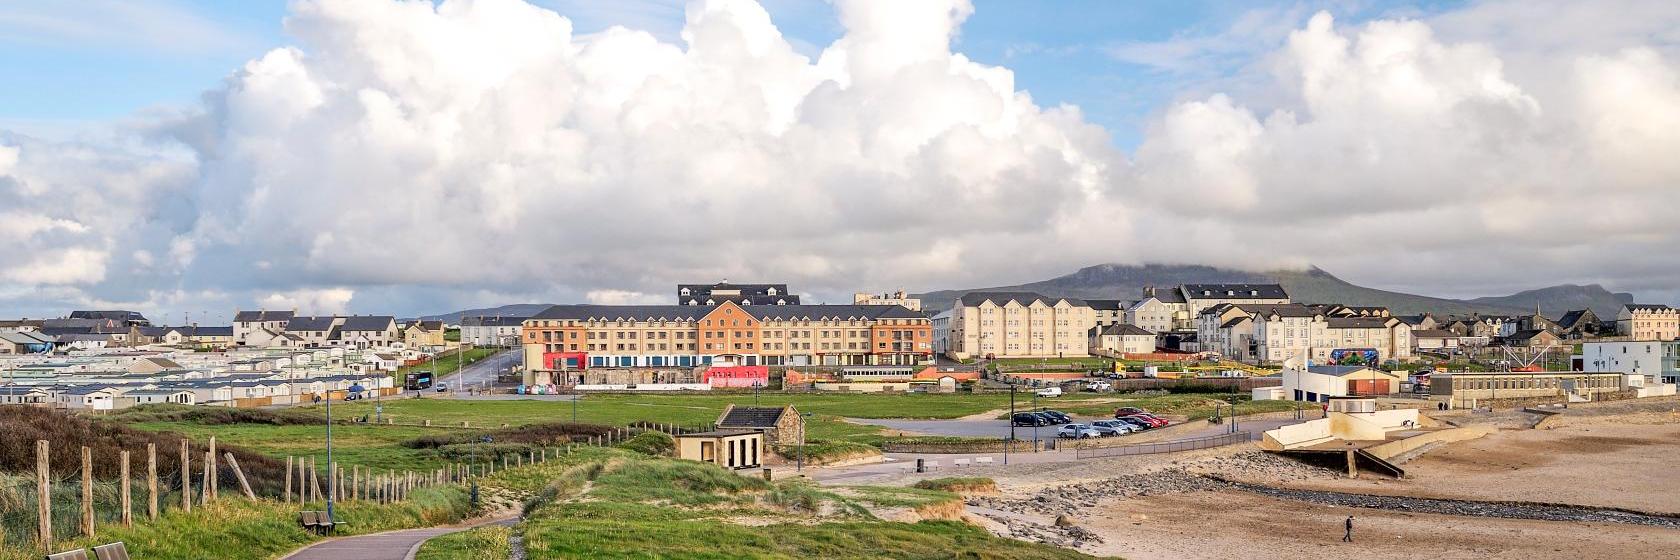 Towns and Cities Near Bundoran (Donegal) - Within 40 Miles 